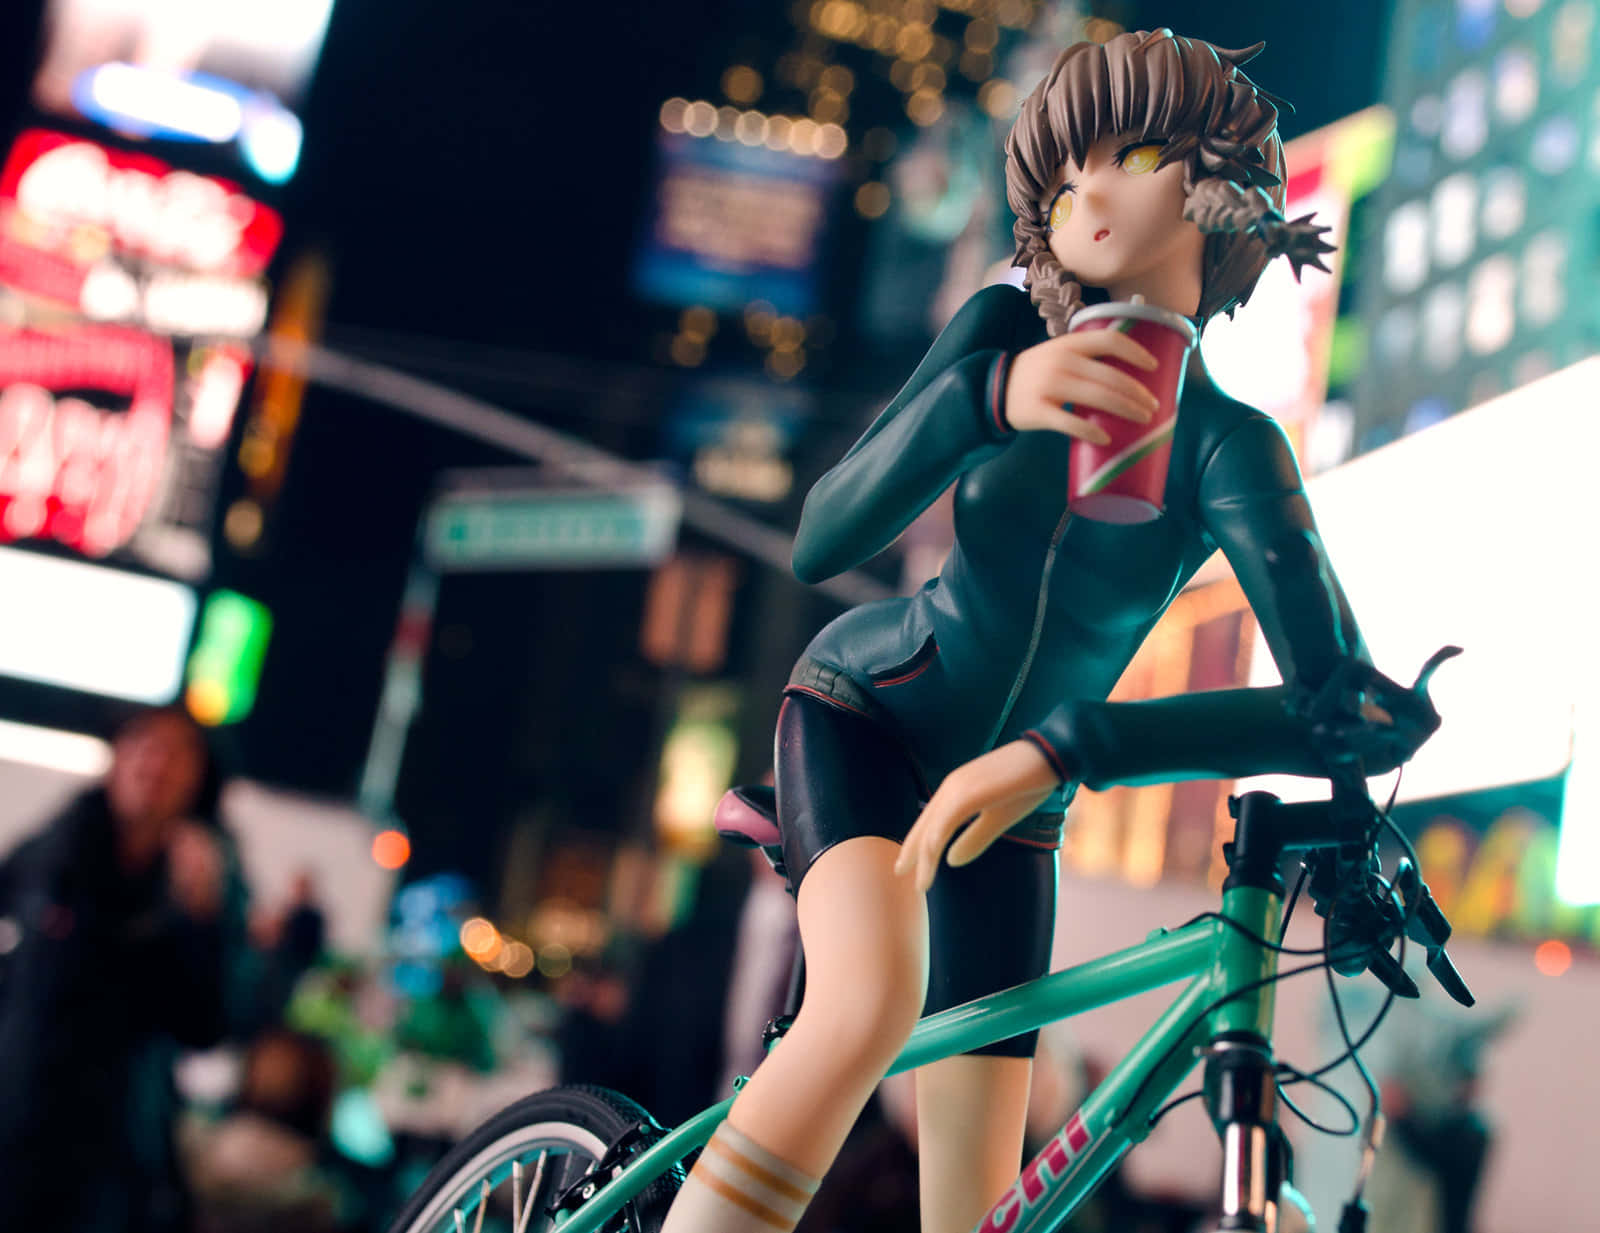 Suzuha Amane standing with her bicycle in a serene environment Wallpaper